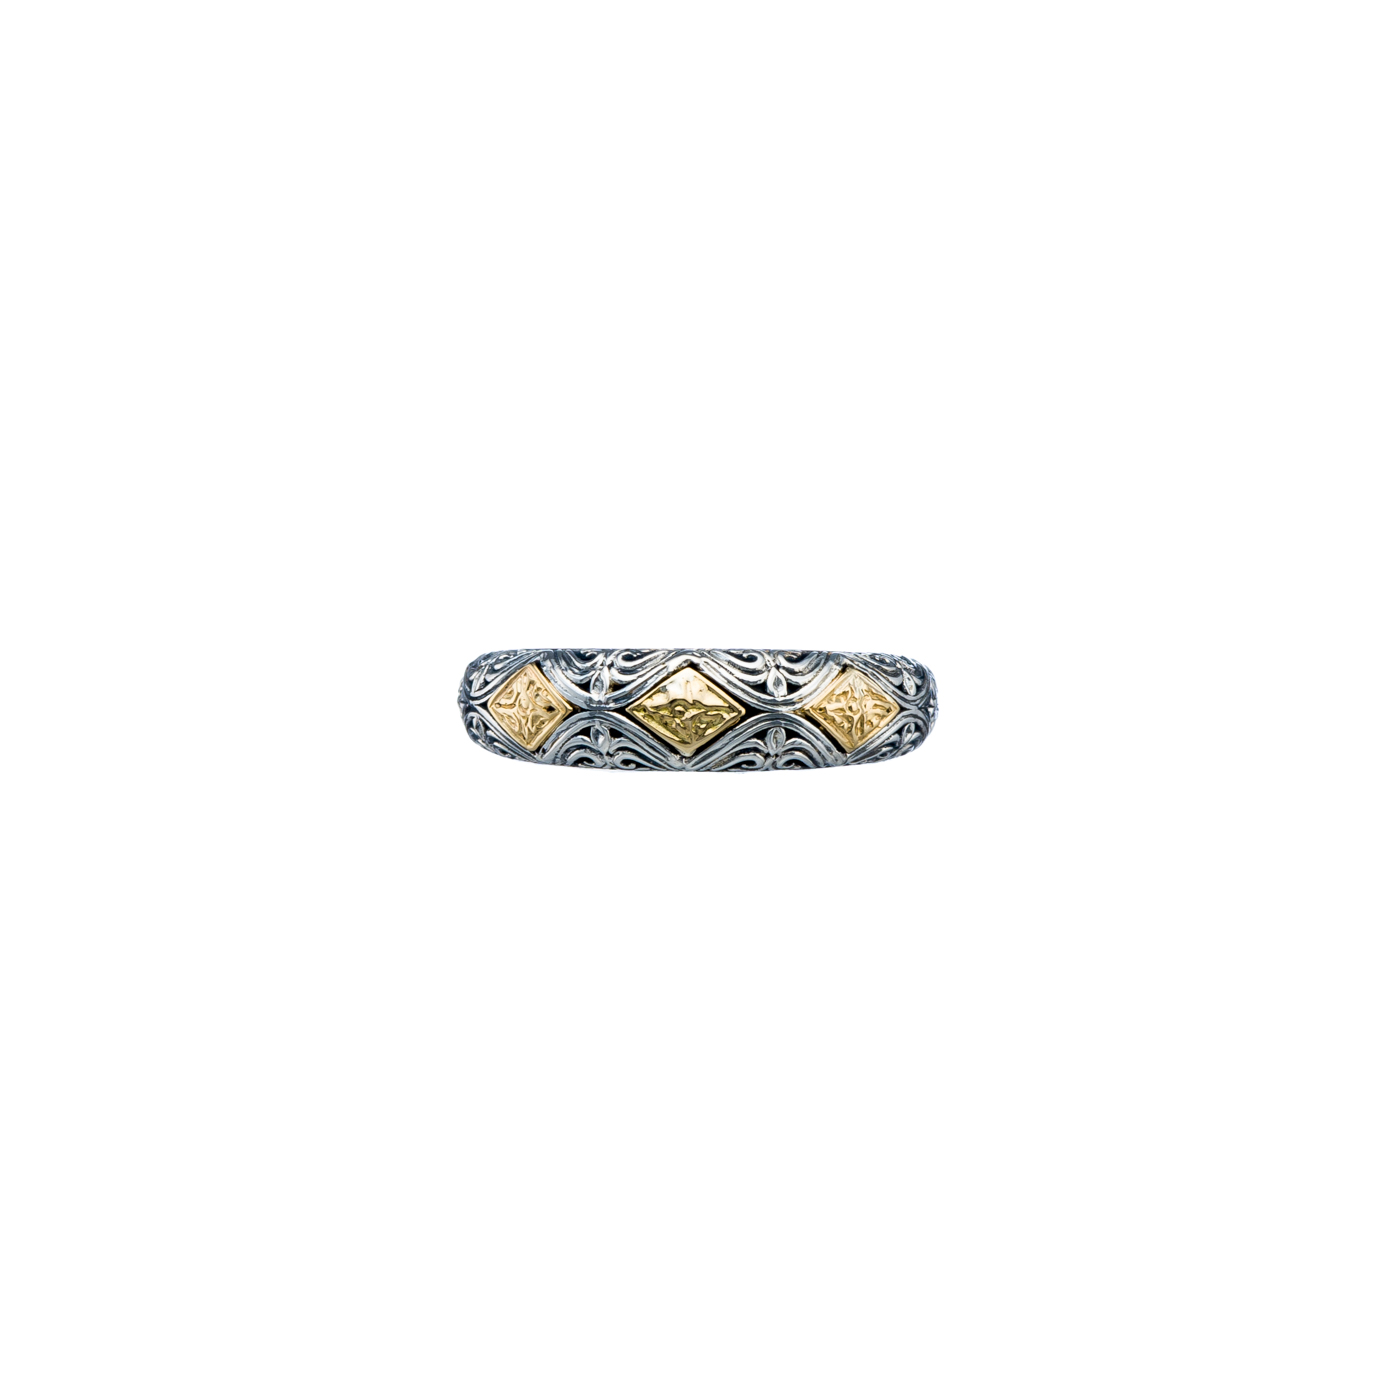 Band ring in 18K Gold & Sterling silver